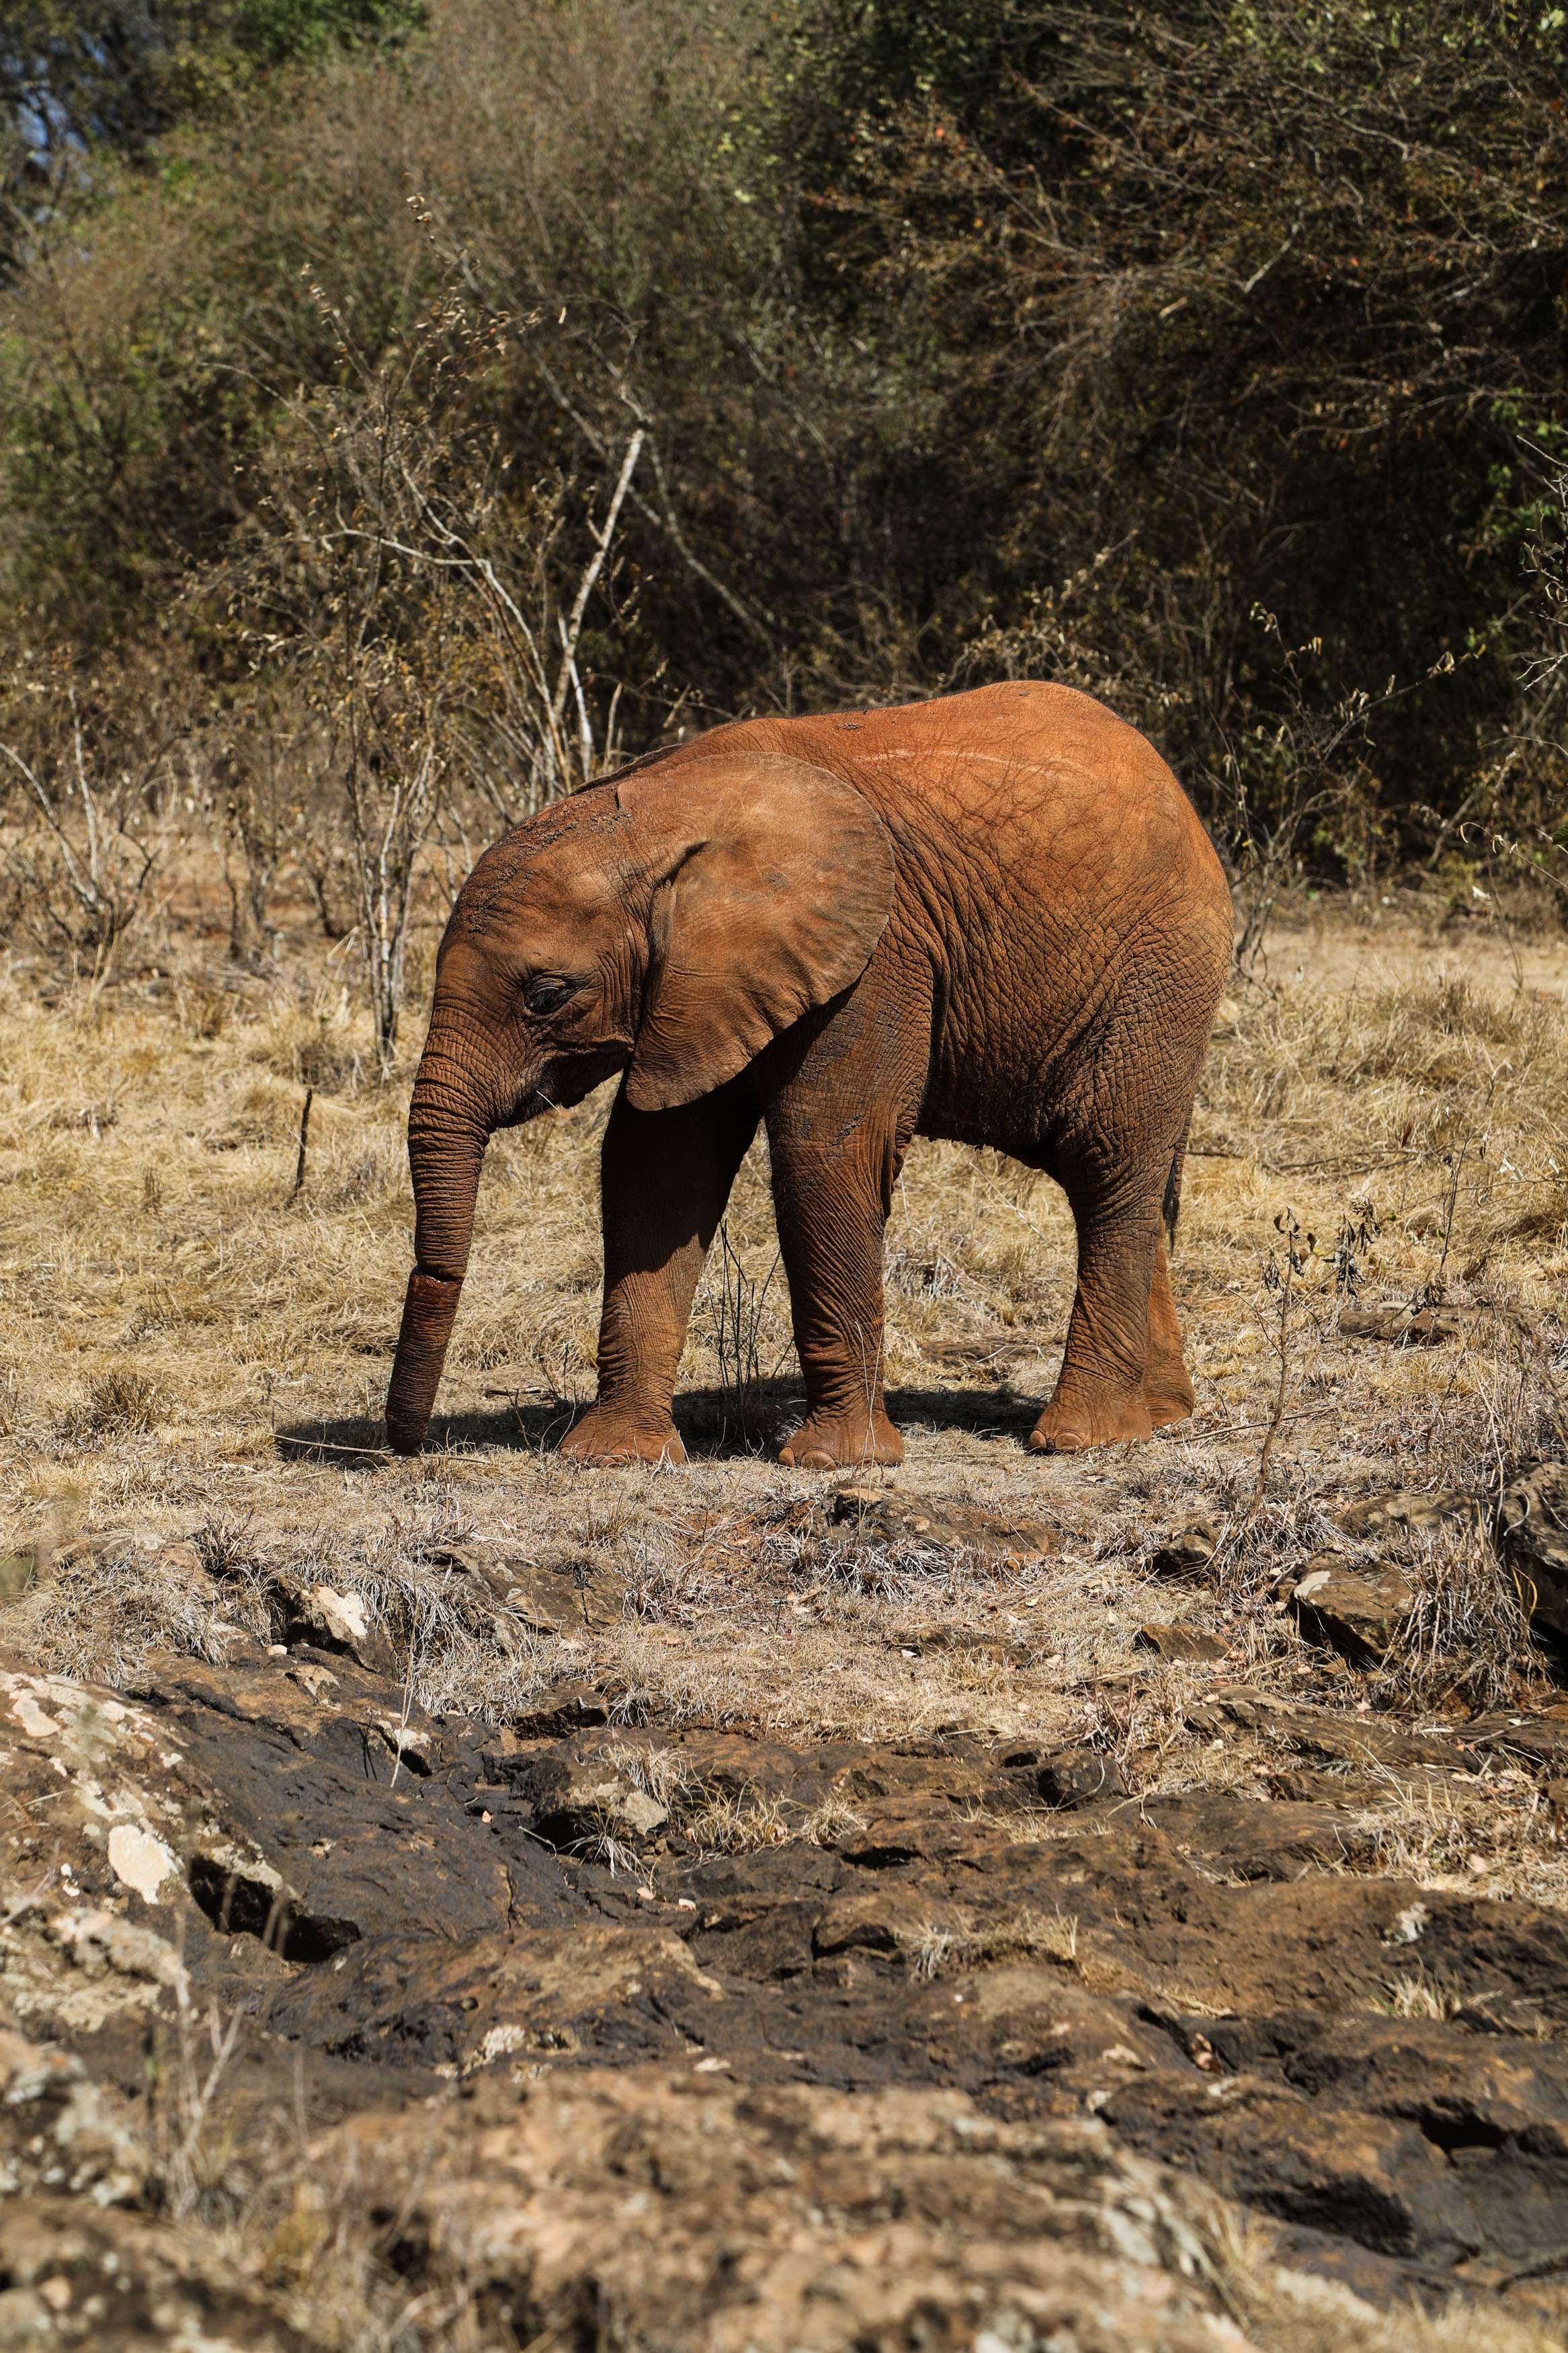 Badly injured baby elephant Enkesha was rescued from the Maasai Mara and flown to Nairobi for an operation to try and save her severed trunk. Here are the latest pictures of her recovery